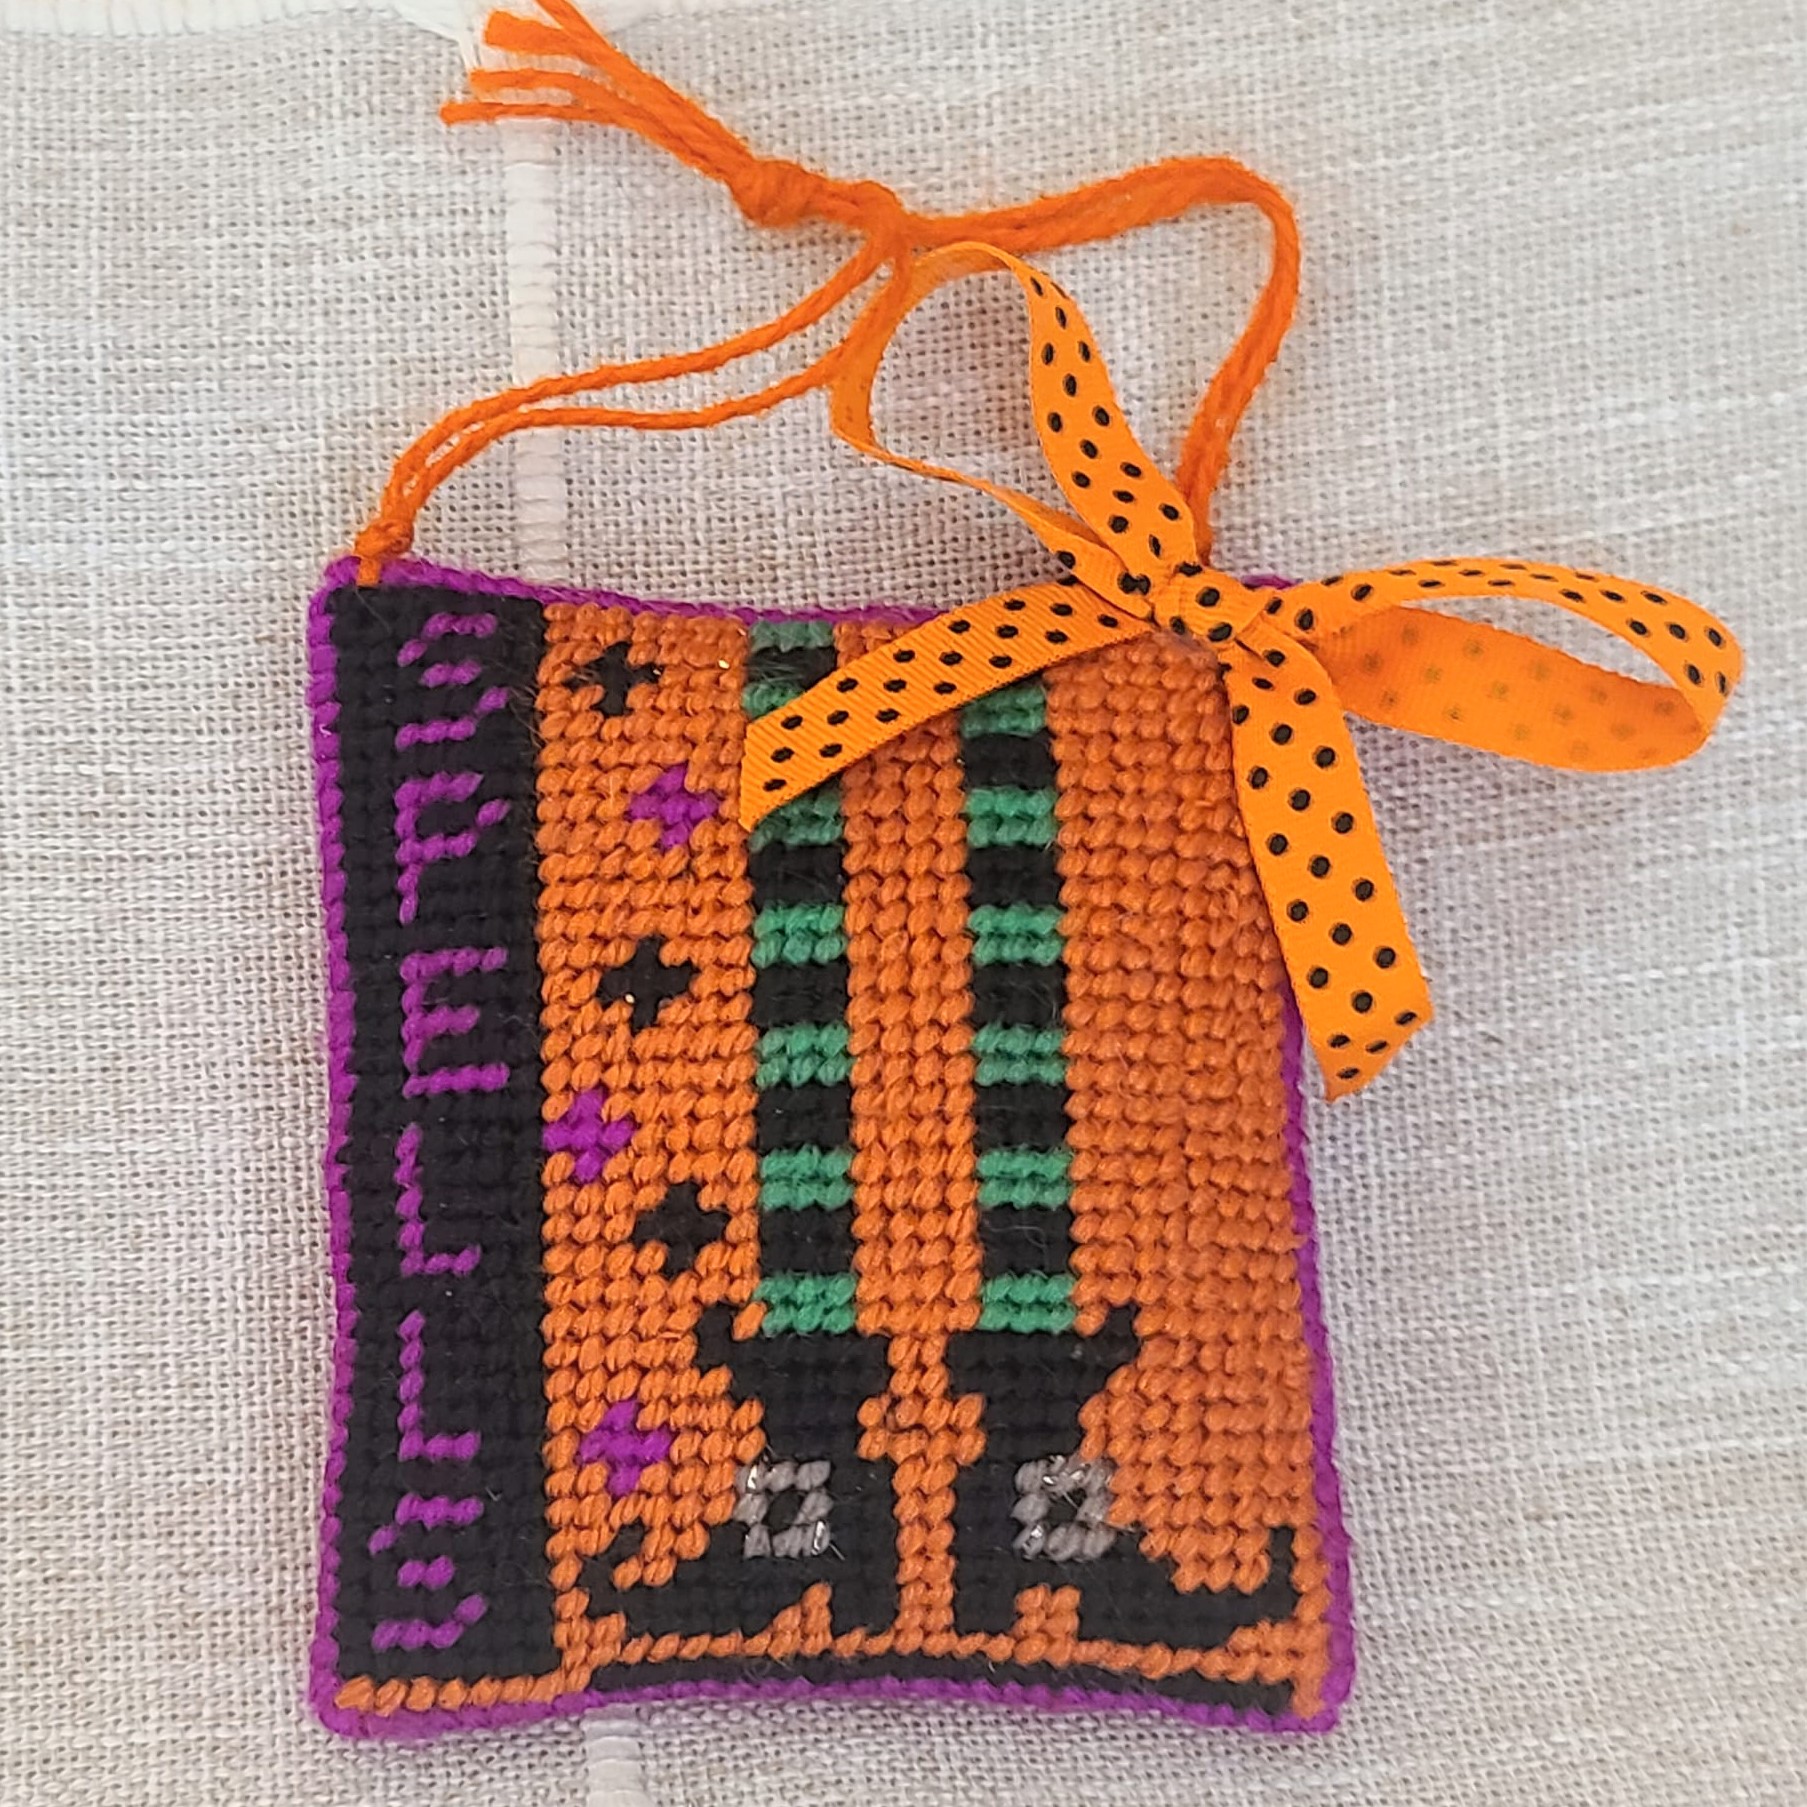 Halloween finished needlepoint SPELLS witch legs ornament